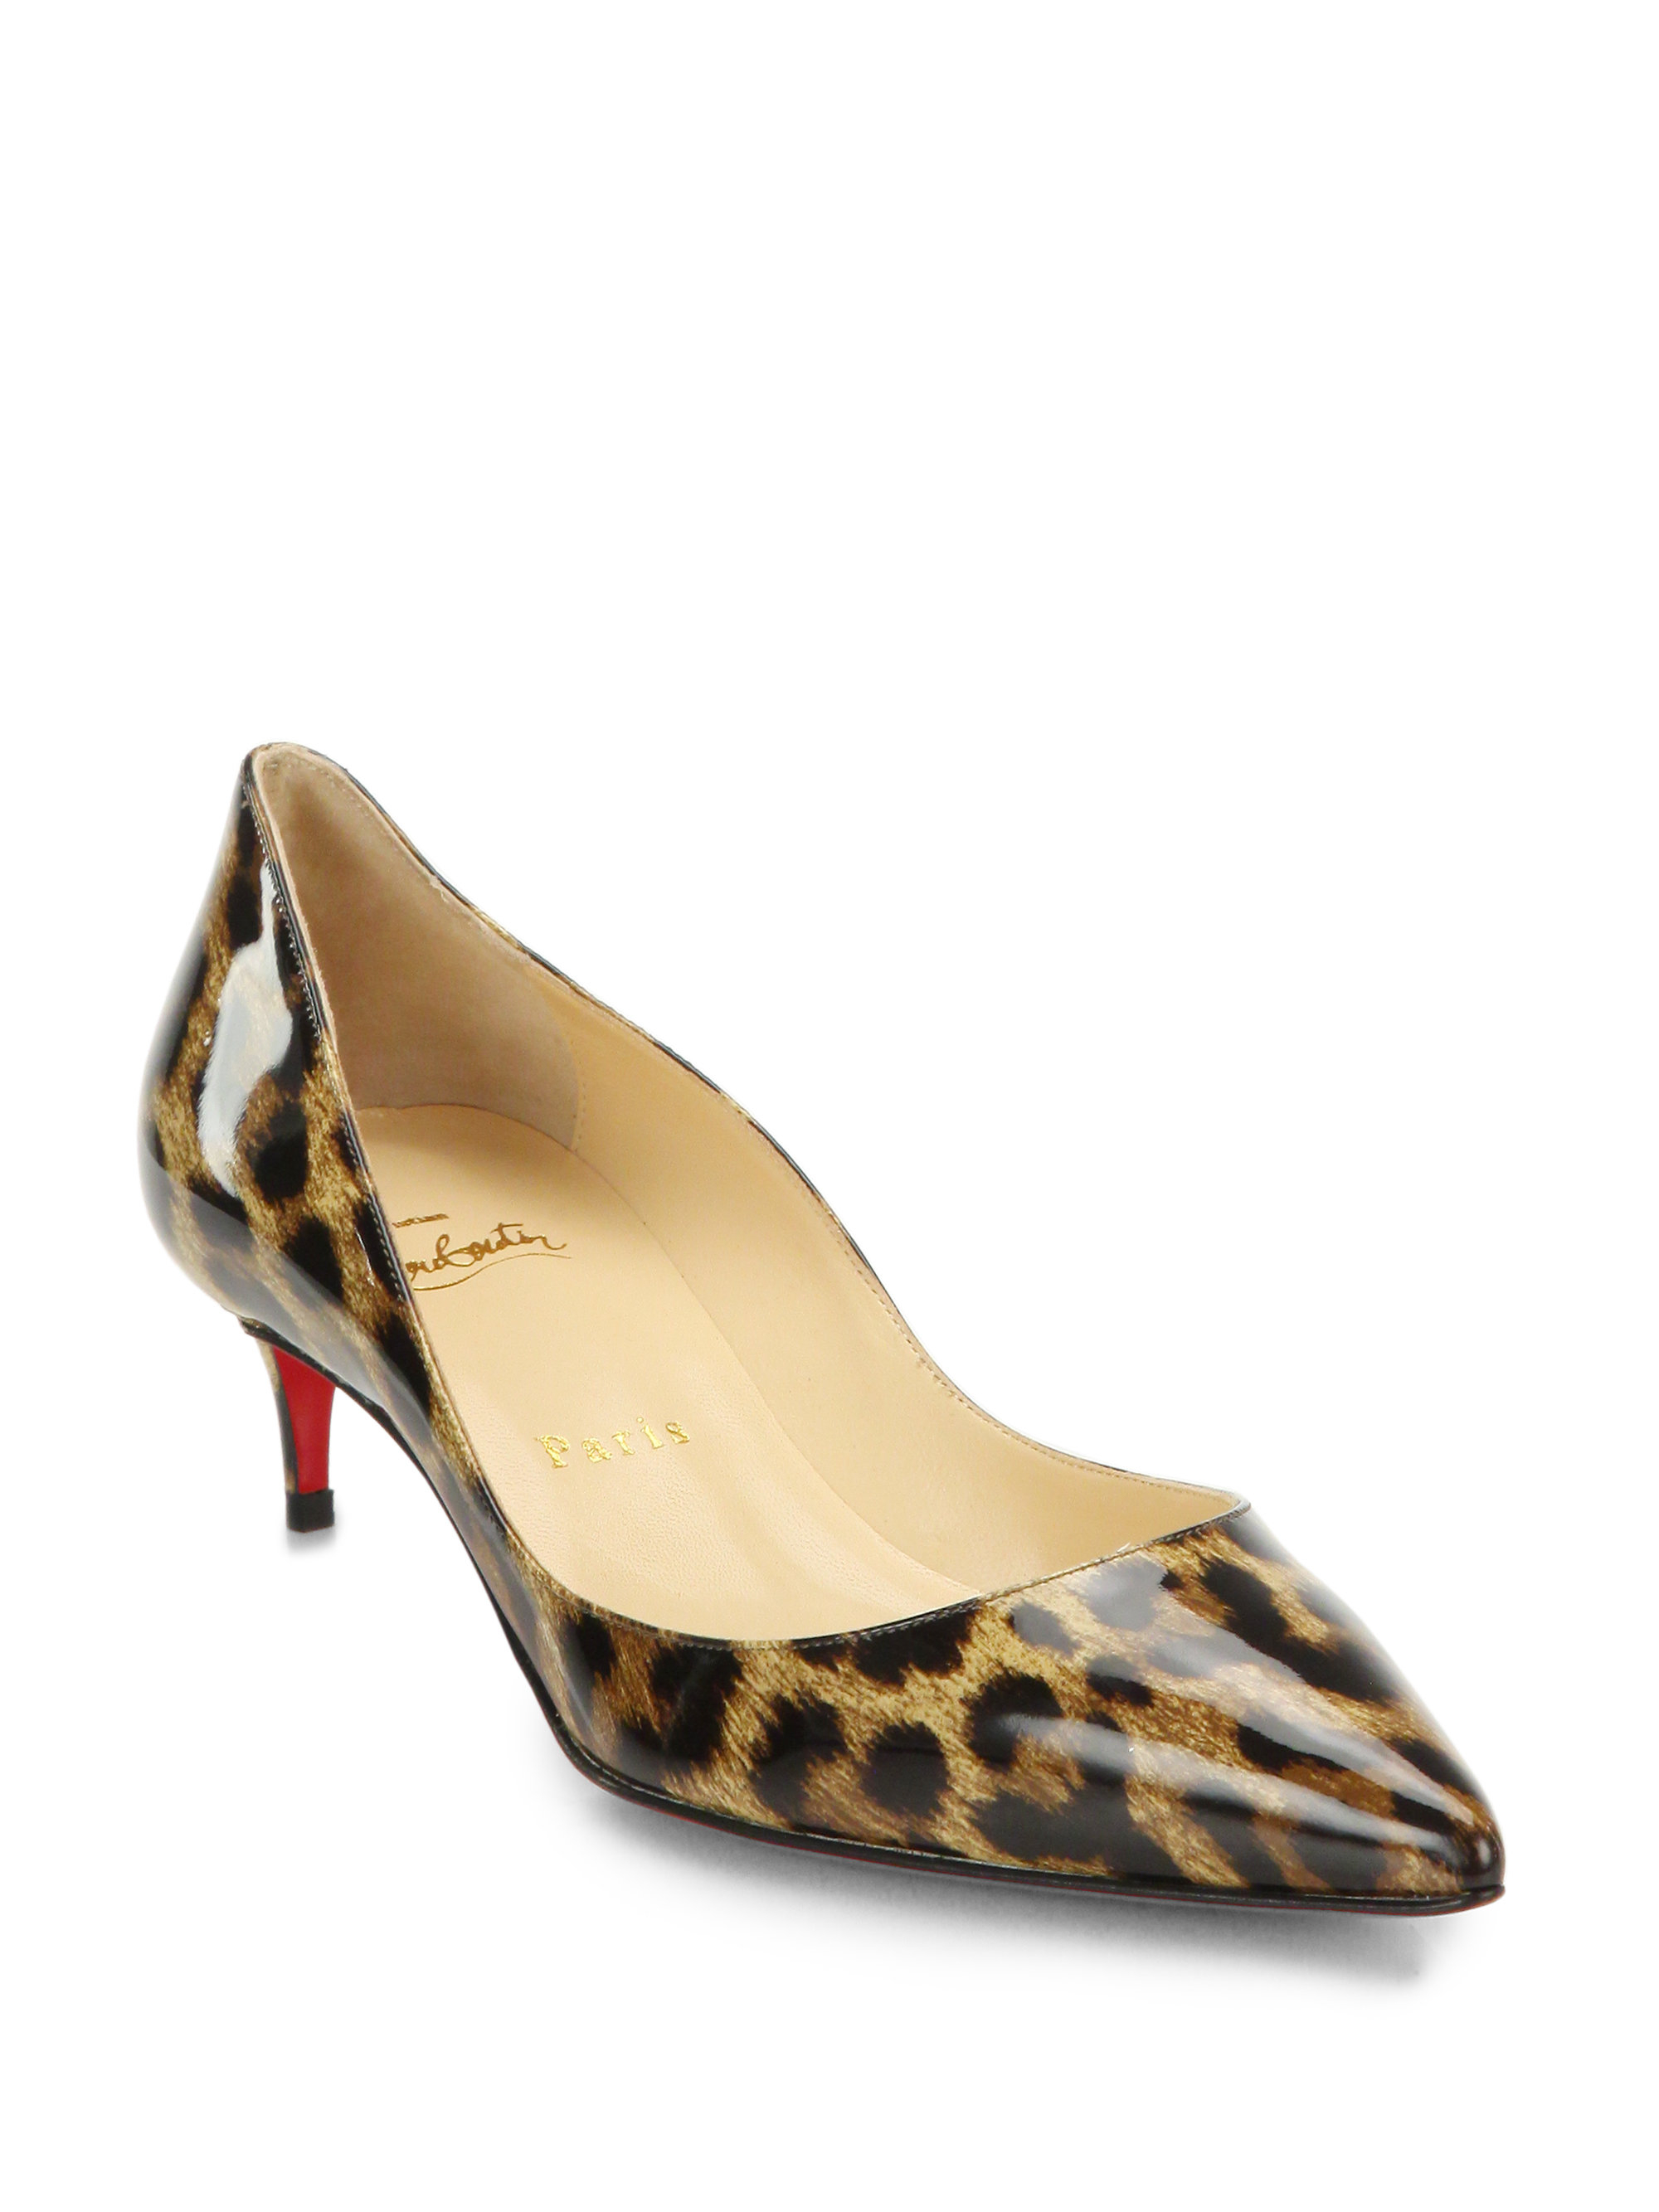 ... Louboutin Rocket Leopard Print Patent Leather Point-Toe Pumps in Brown